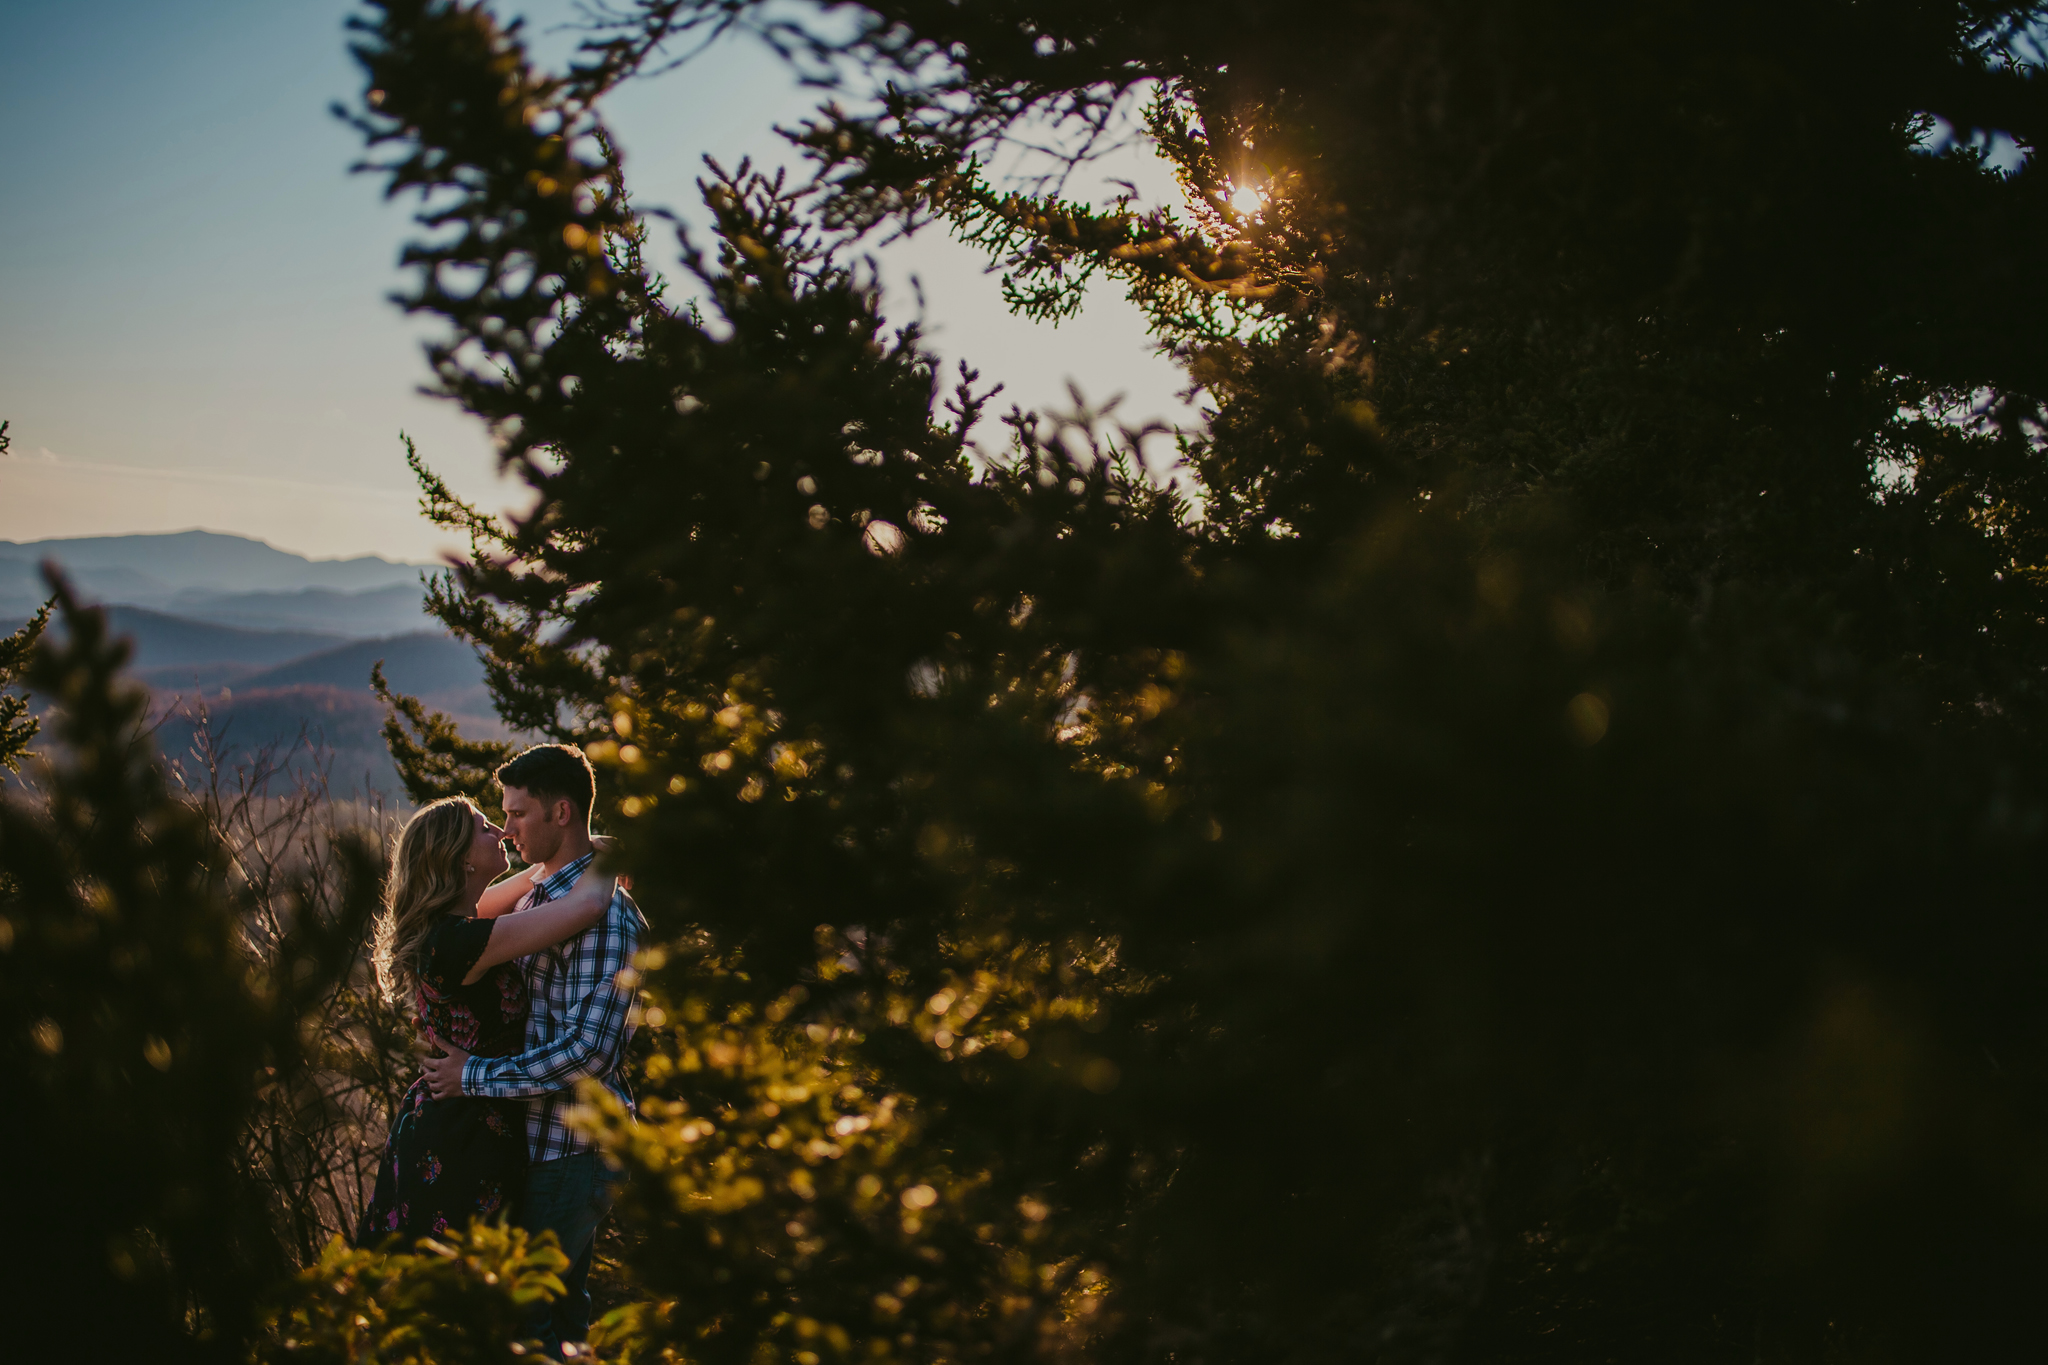 the sunlight kisses this engaged couple during their photography session in the mountains of North Carolina. Photography by Mabyn Ludke.